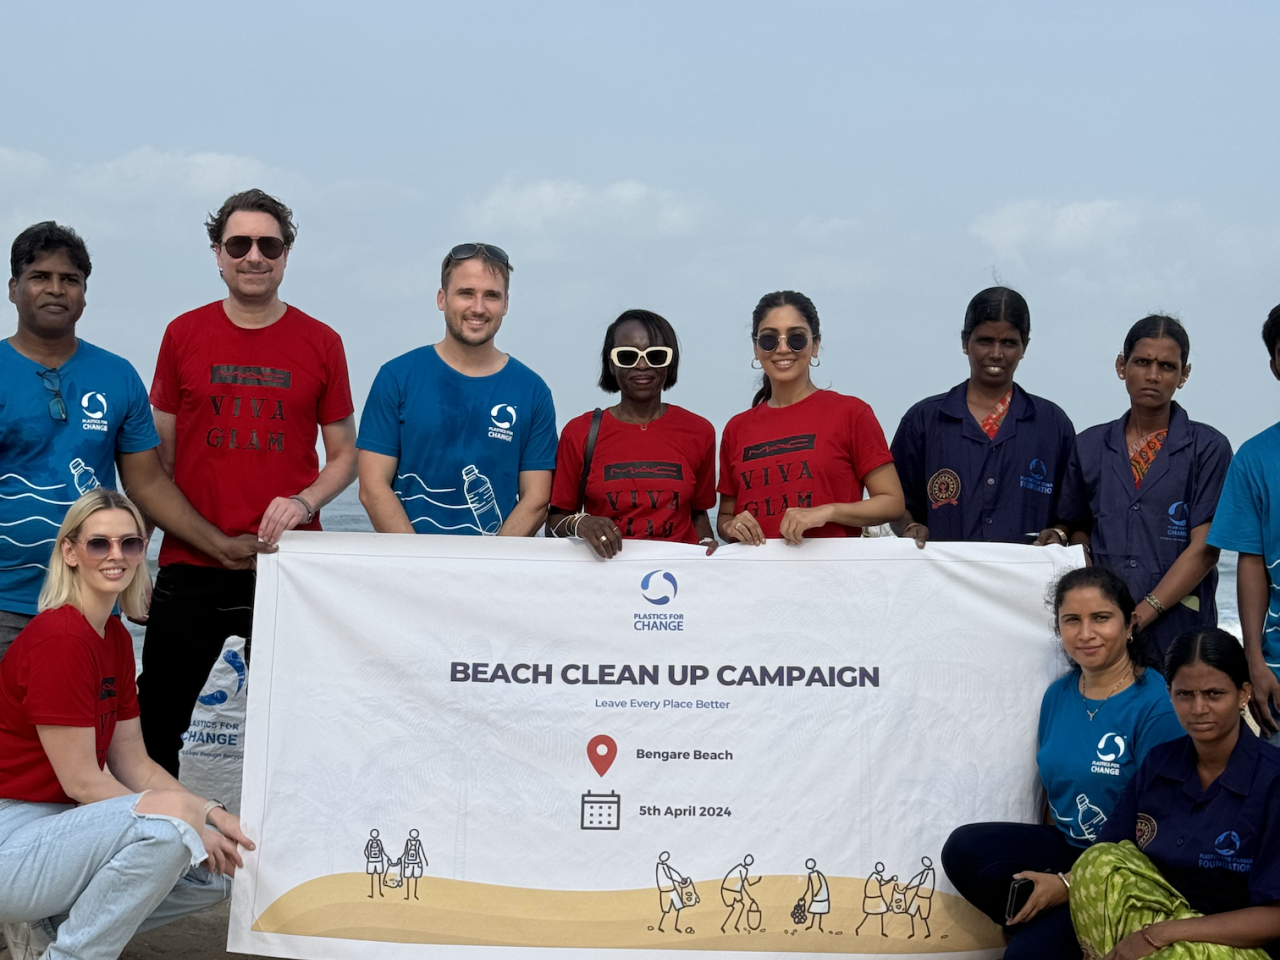 Volunteers pose with Beach clean up campaign banner